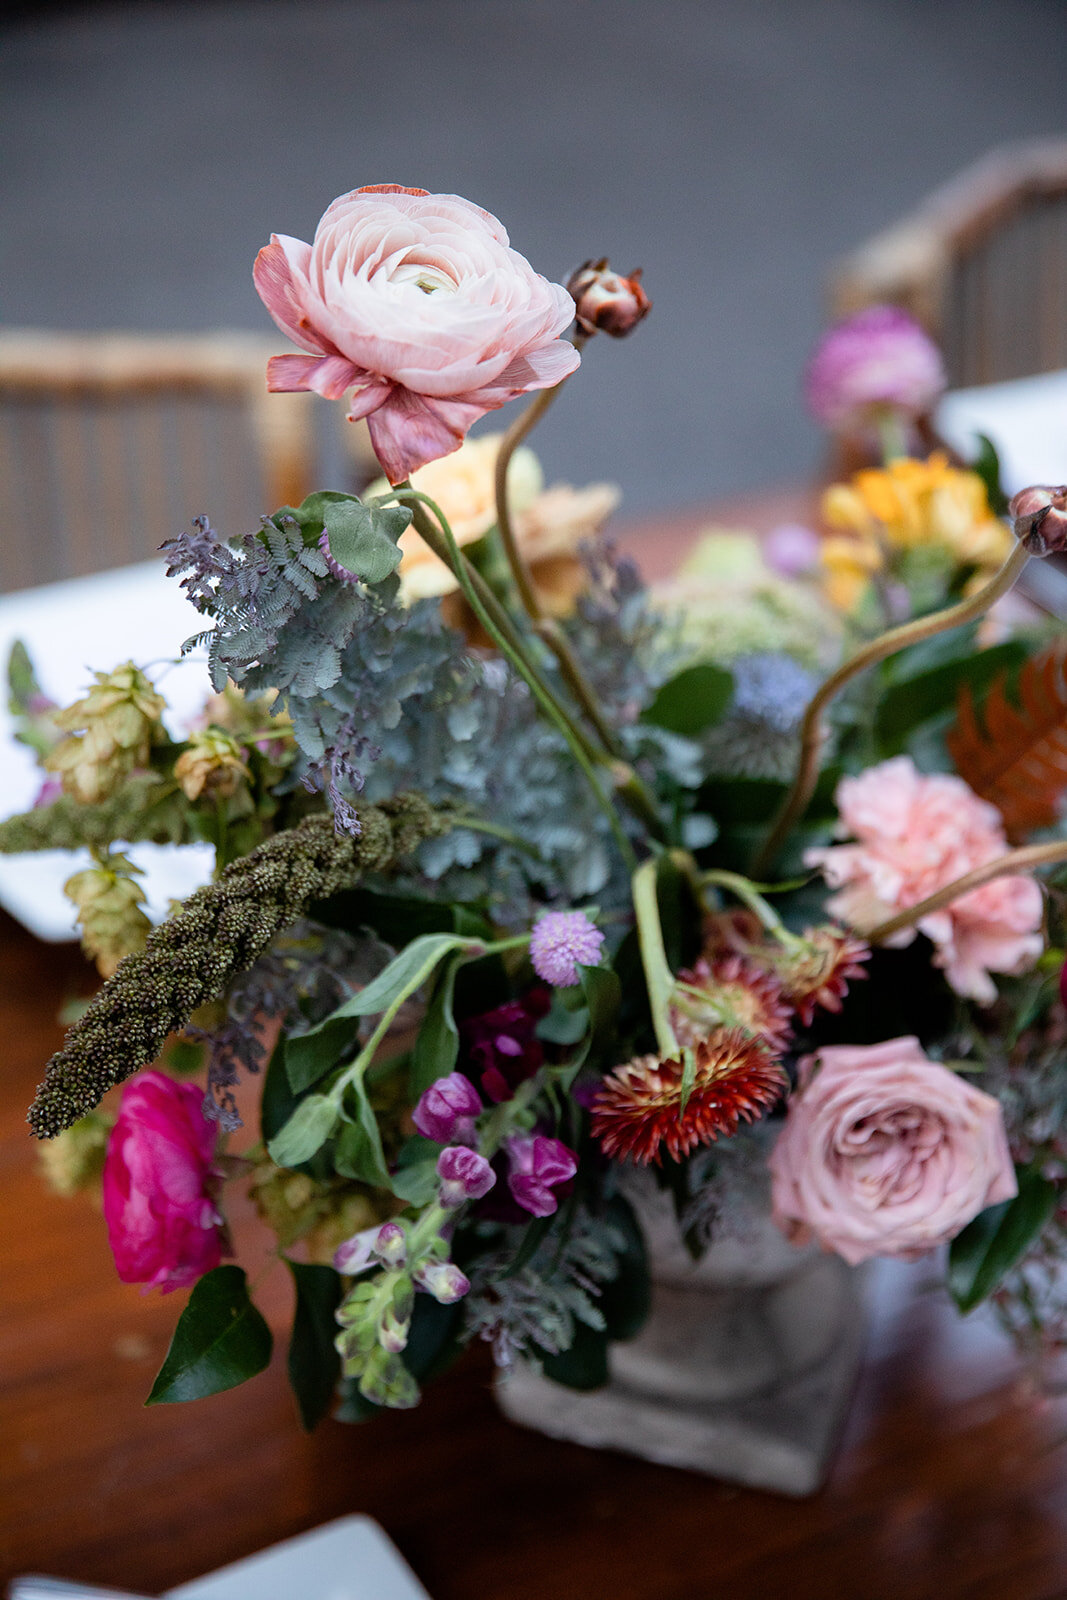 Garden urn wildflower centerpiece with deep red garden roses, dusty pink ranunculus, hops, berries, maroon snapdragon, thistles, golden yellow zinnias, and natural greenery. RT Lodge and Nashville luxury wedding floral designer.